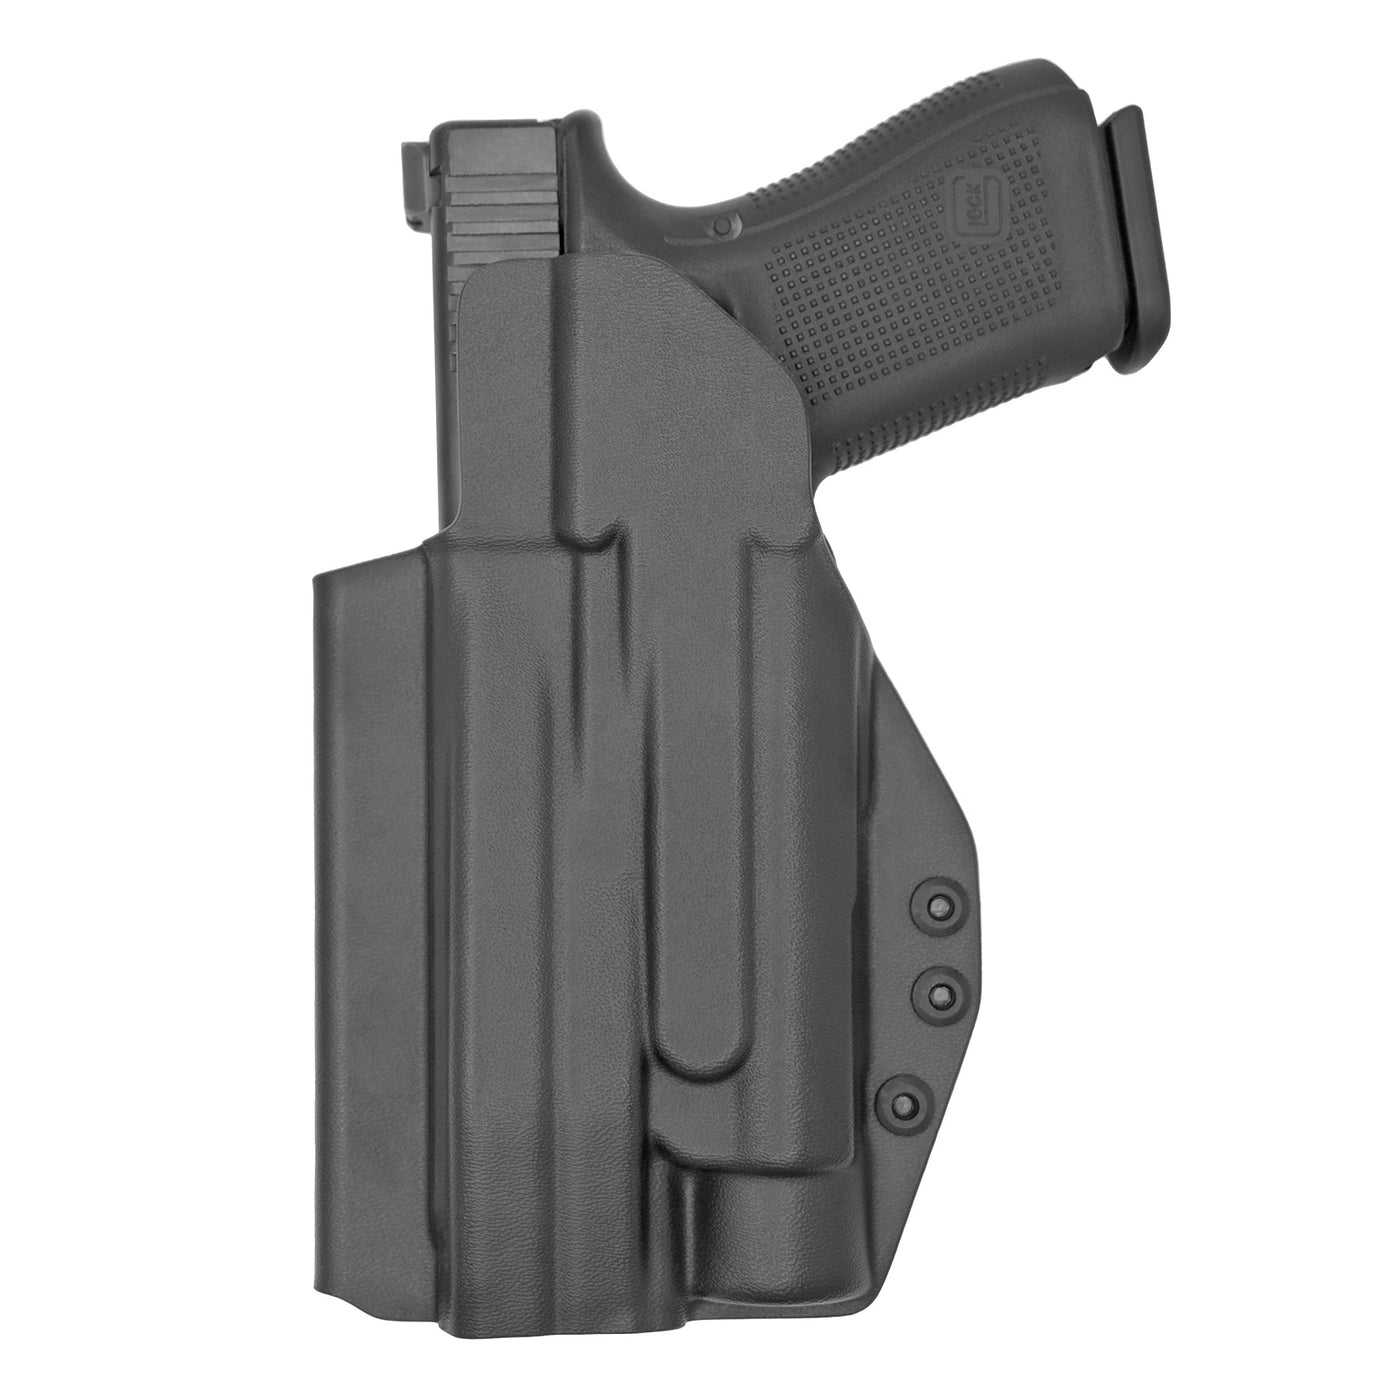 C&G Holsters Custom IWB Tactical Glock Streamlight TLR1/HL in holstered position back view